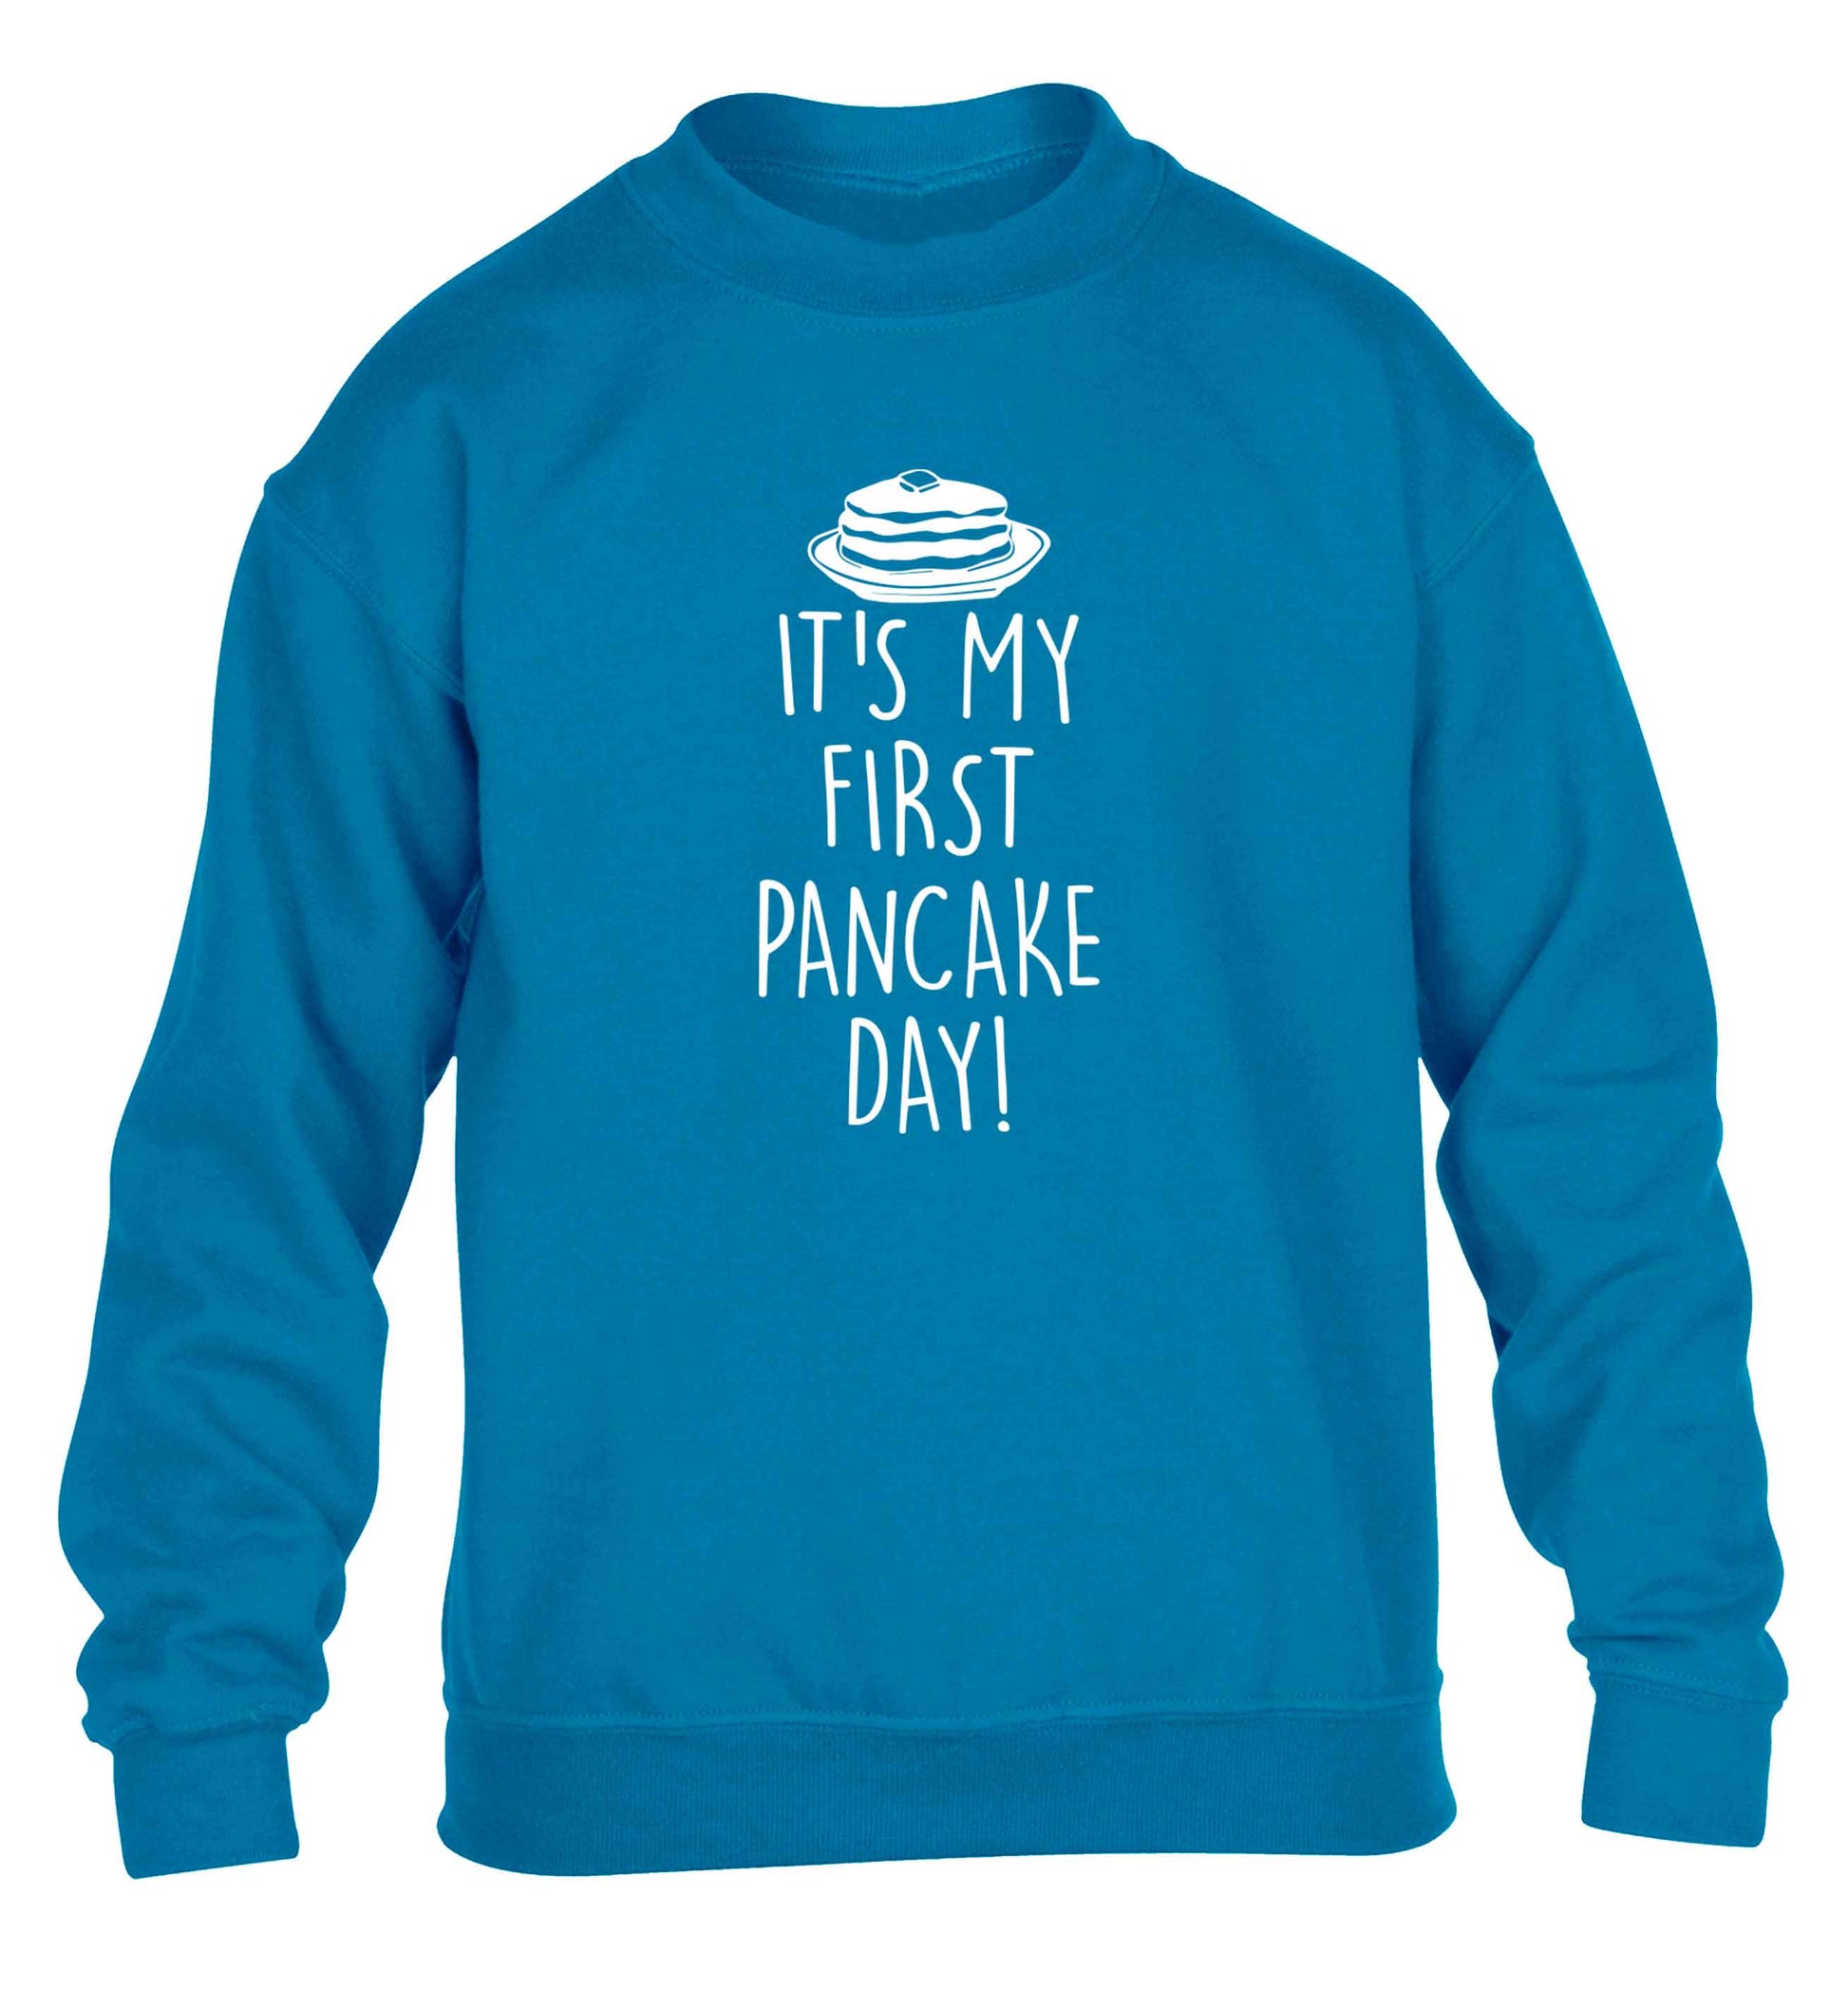 It's my first pancake day children's blue sweater 12-13 Years